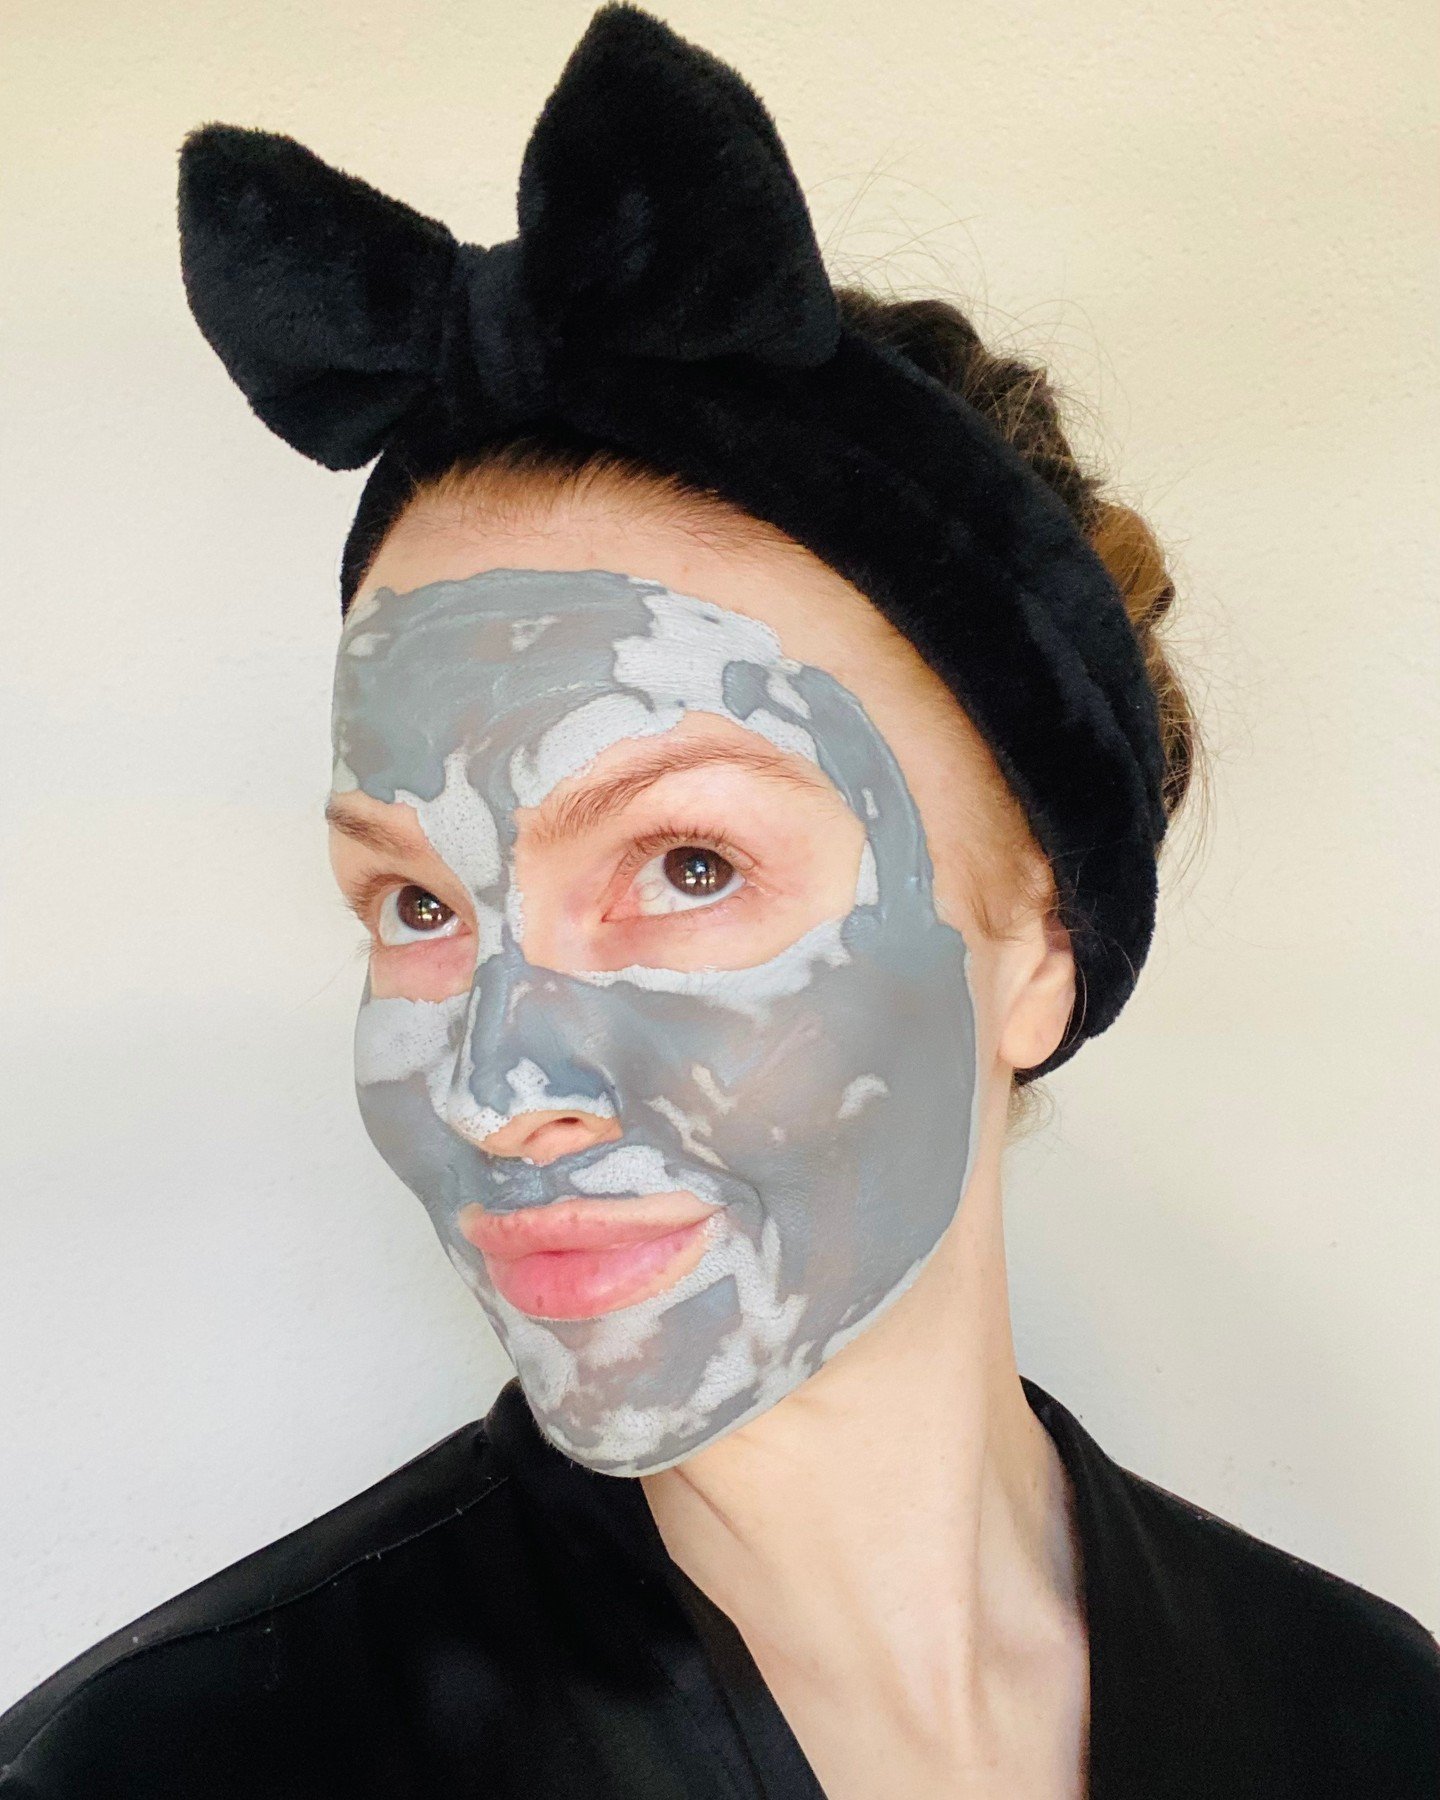 FUN FACT 〰️ My self-care practices were totally hollow, obligatory, and ineffective until my genuine intent was solely based on nurturing and nourishing myself. As a silly example, when I started doing mud masks to earnestly give my skin the care it 